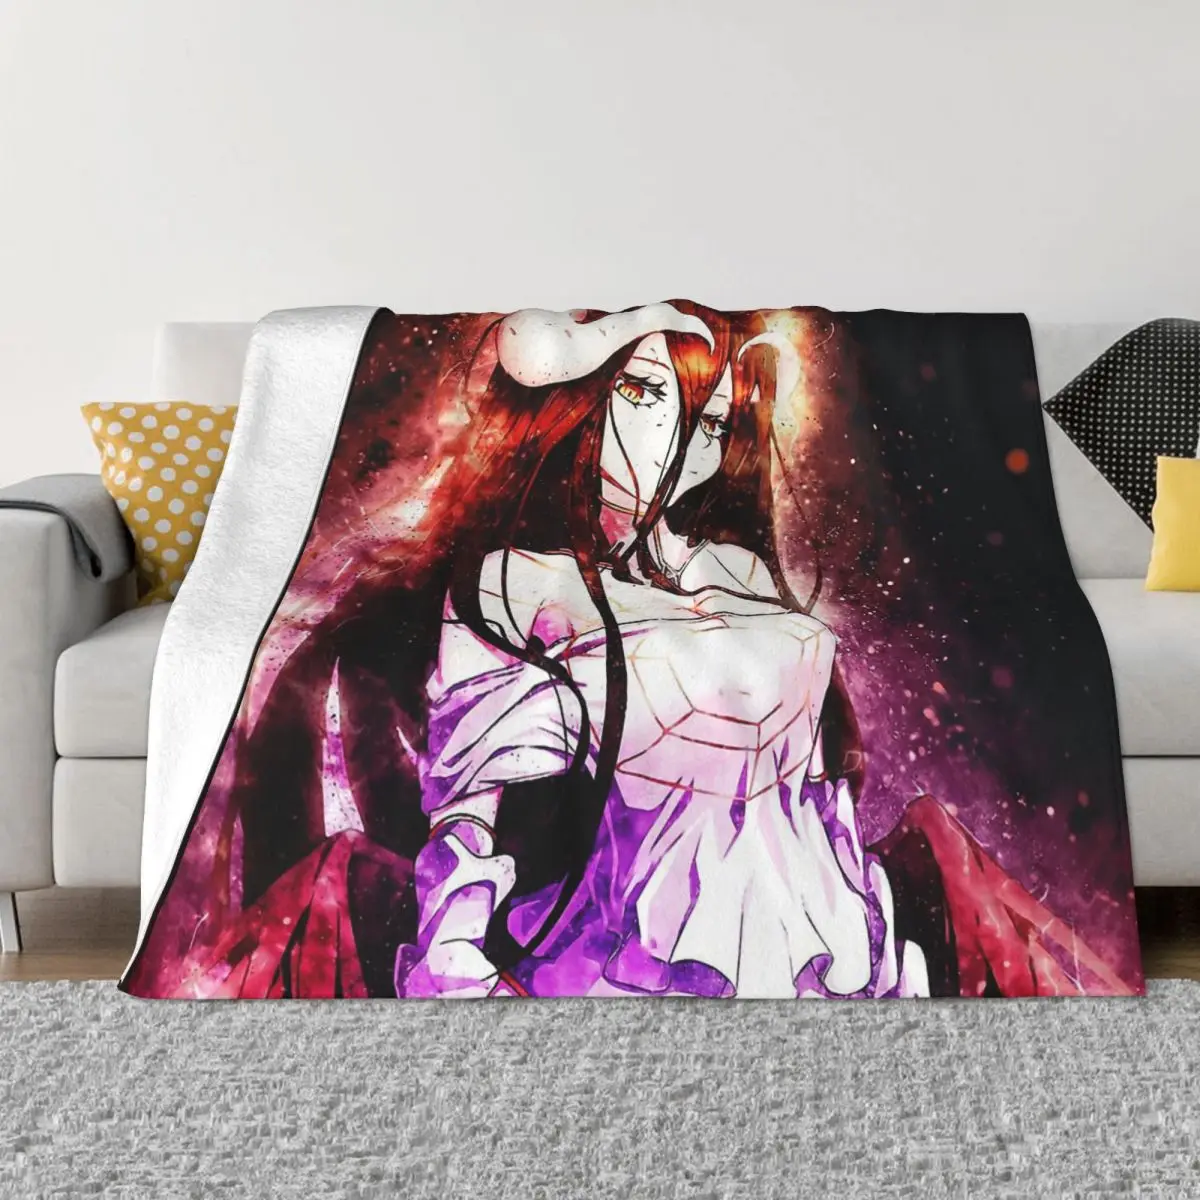 

Overload Over Lord Ainz Ooal Gown Anime Blankets Coral Fleece Plush Decoration Bedroom Bedding Couch Bedspread